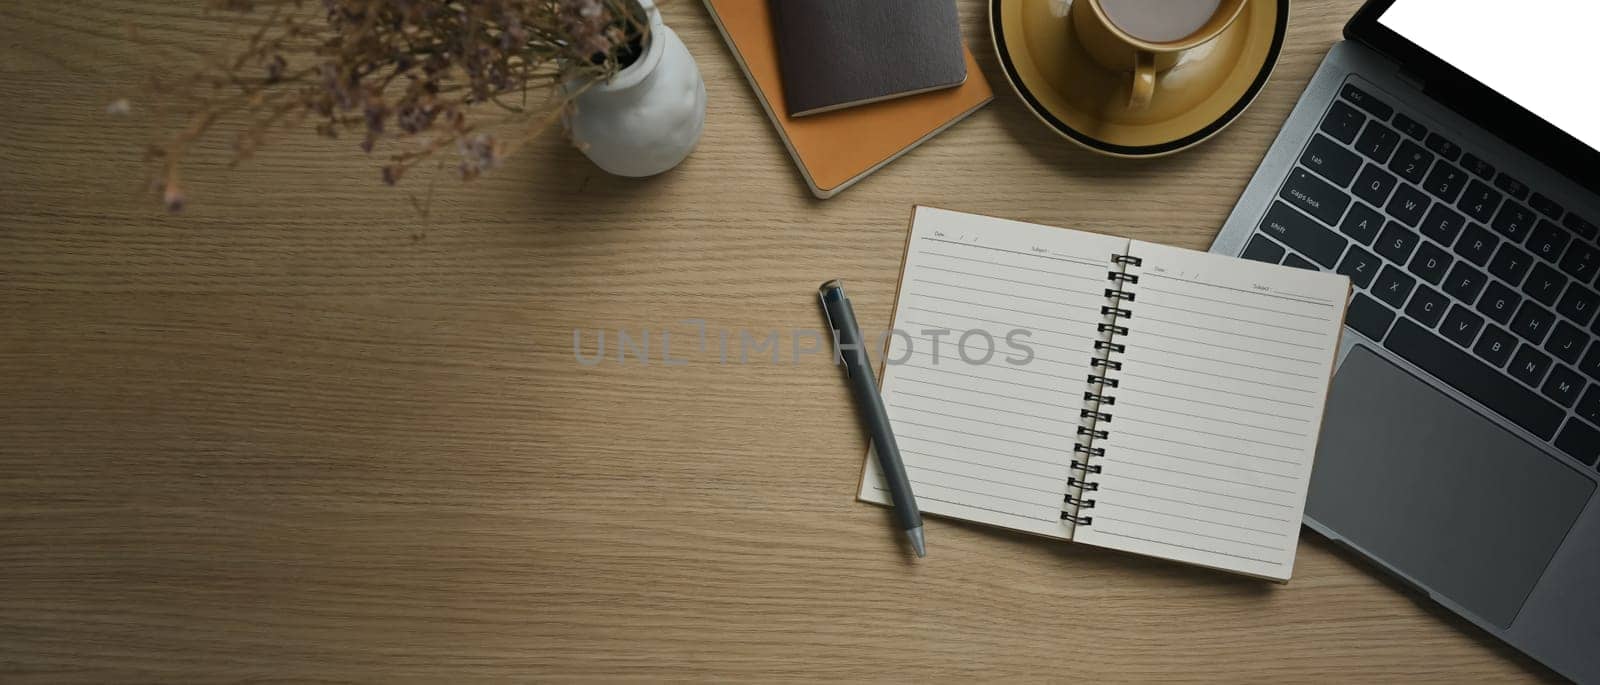 Top view of open notebook, laptop, cup of coffee and notepad on wooden working desk.